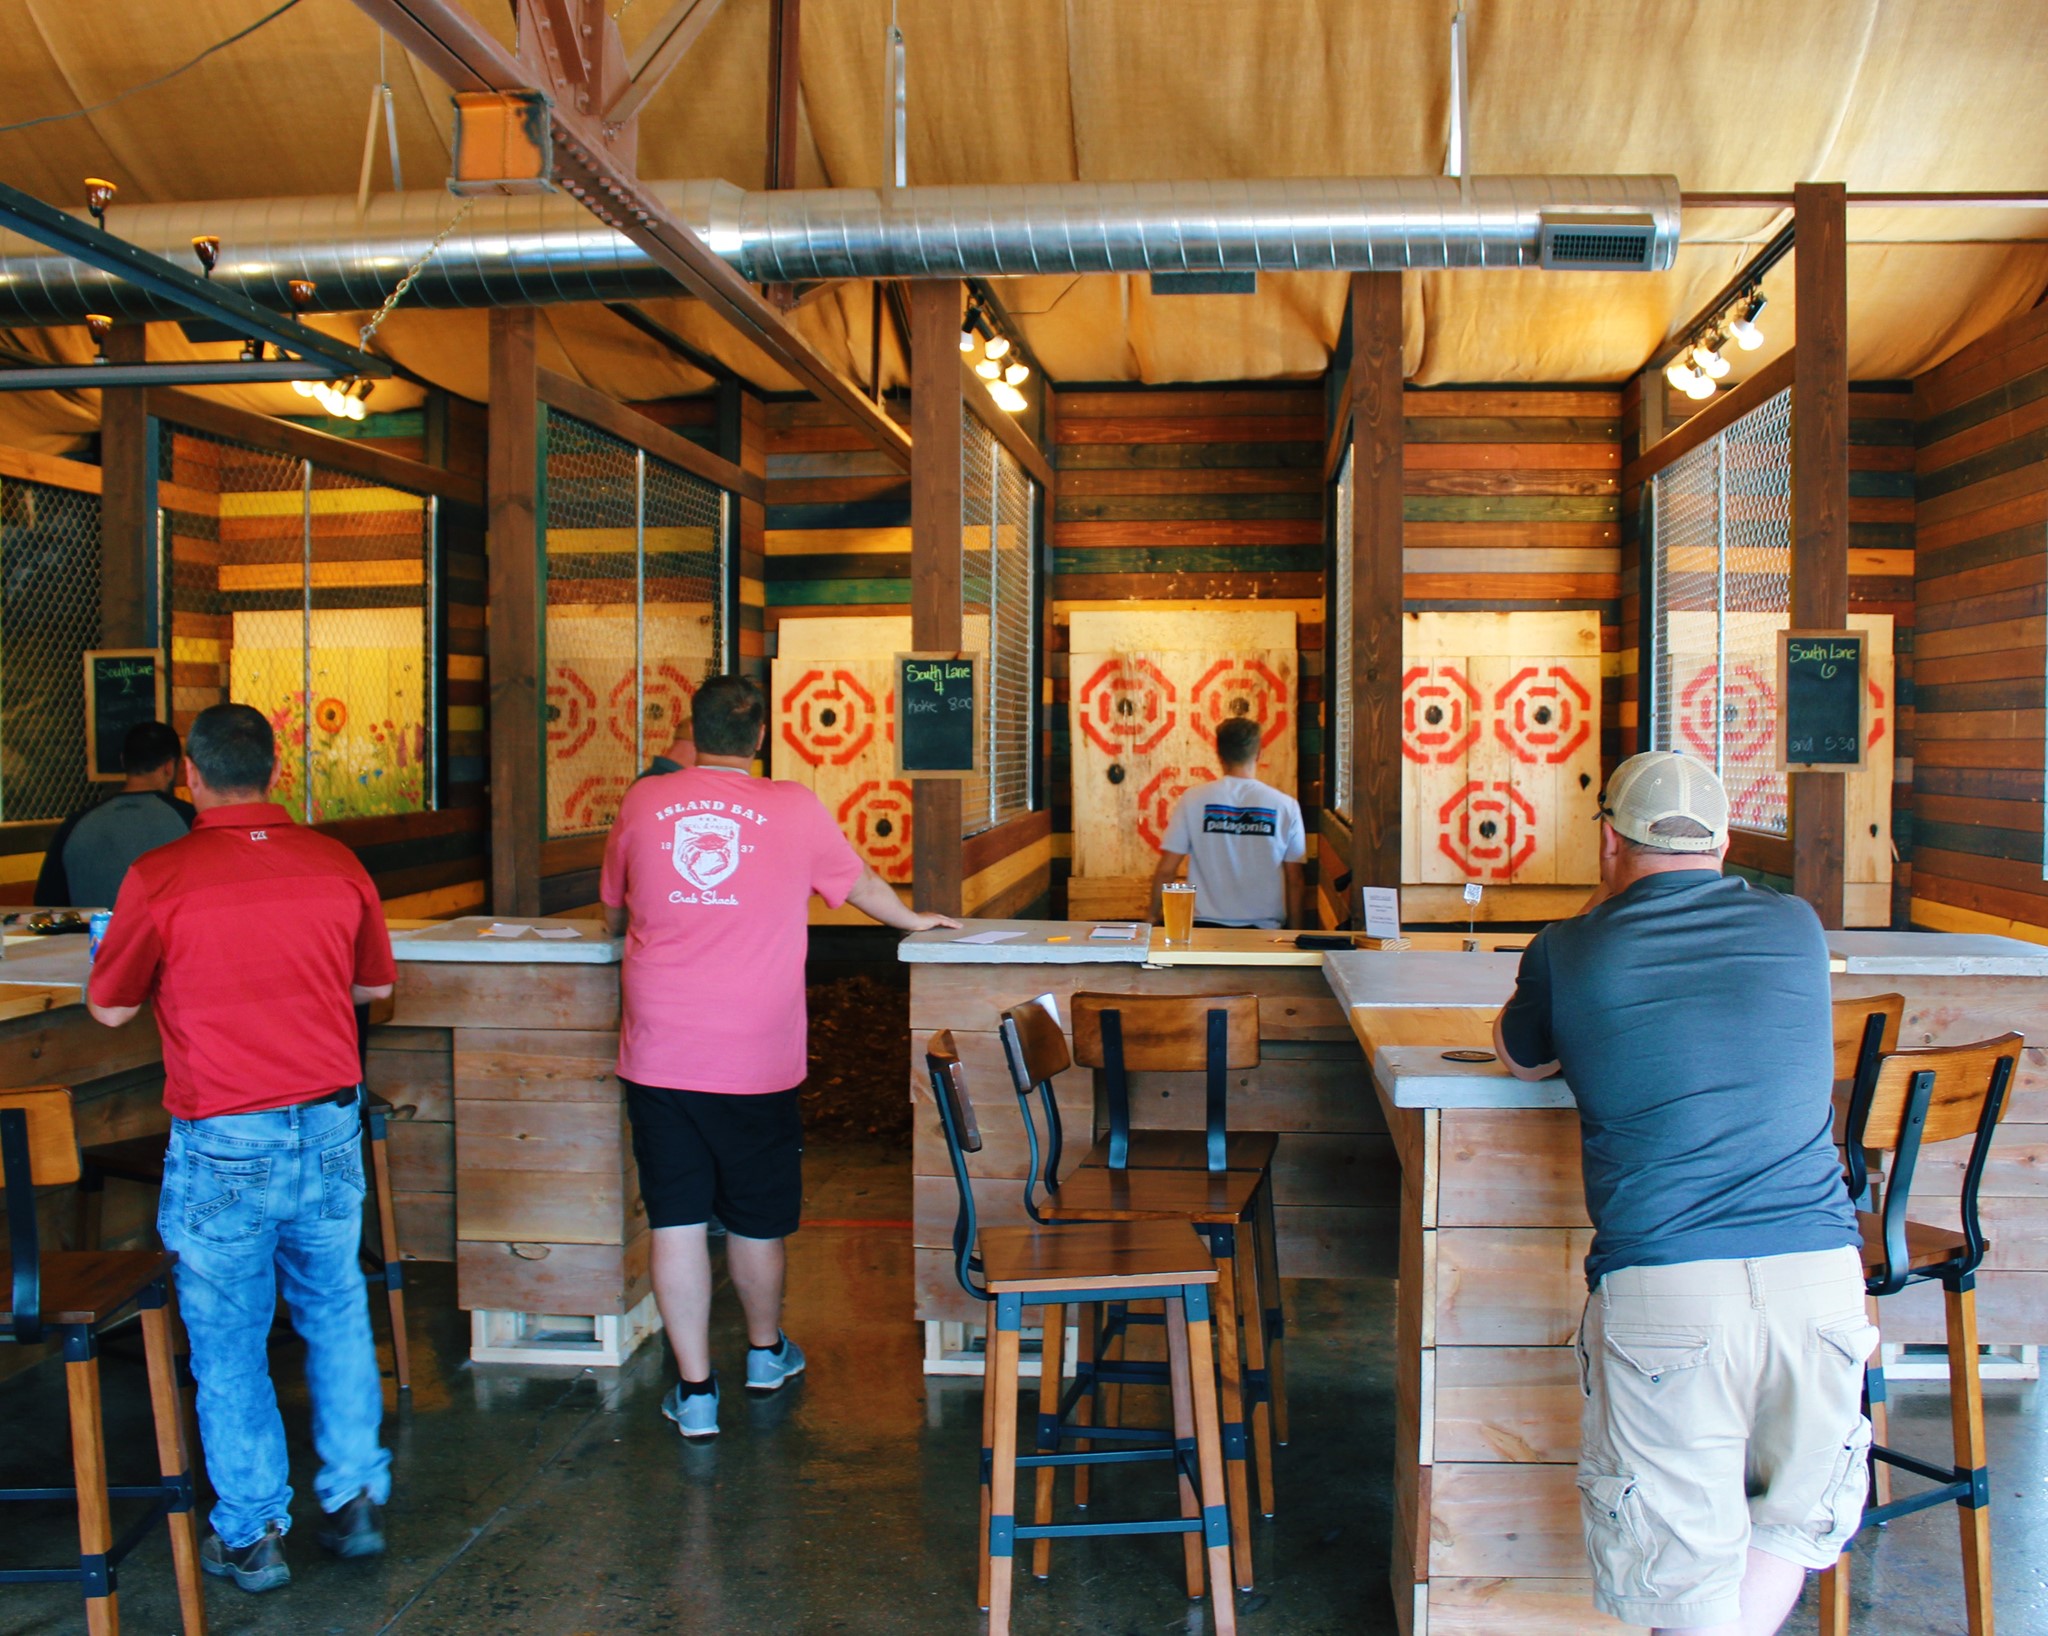 People at different axe throwing stations